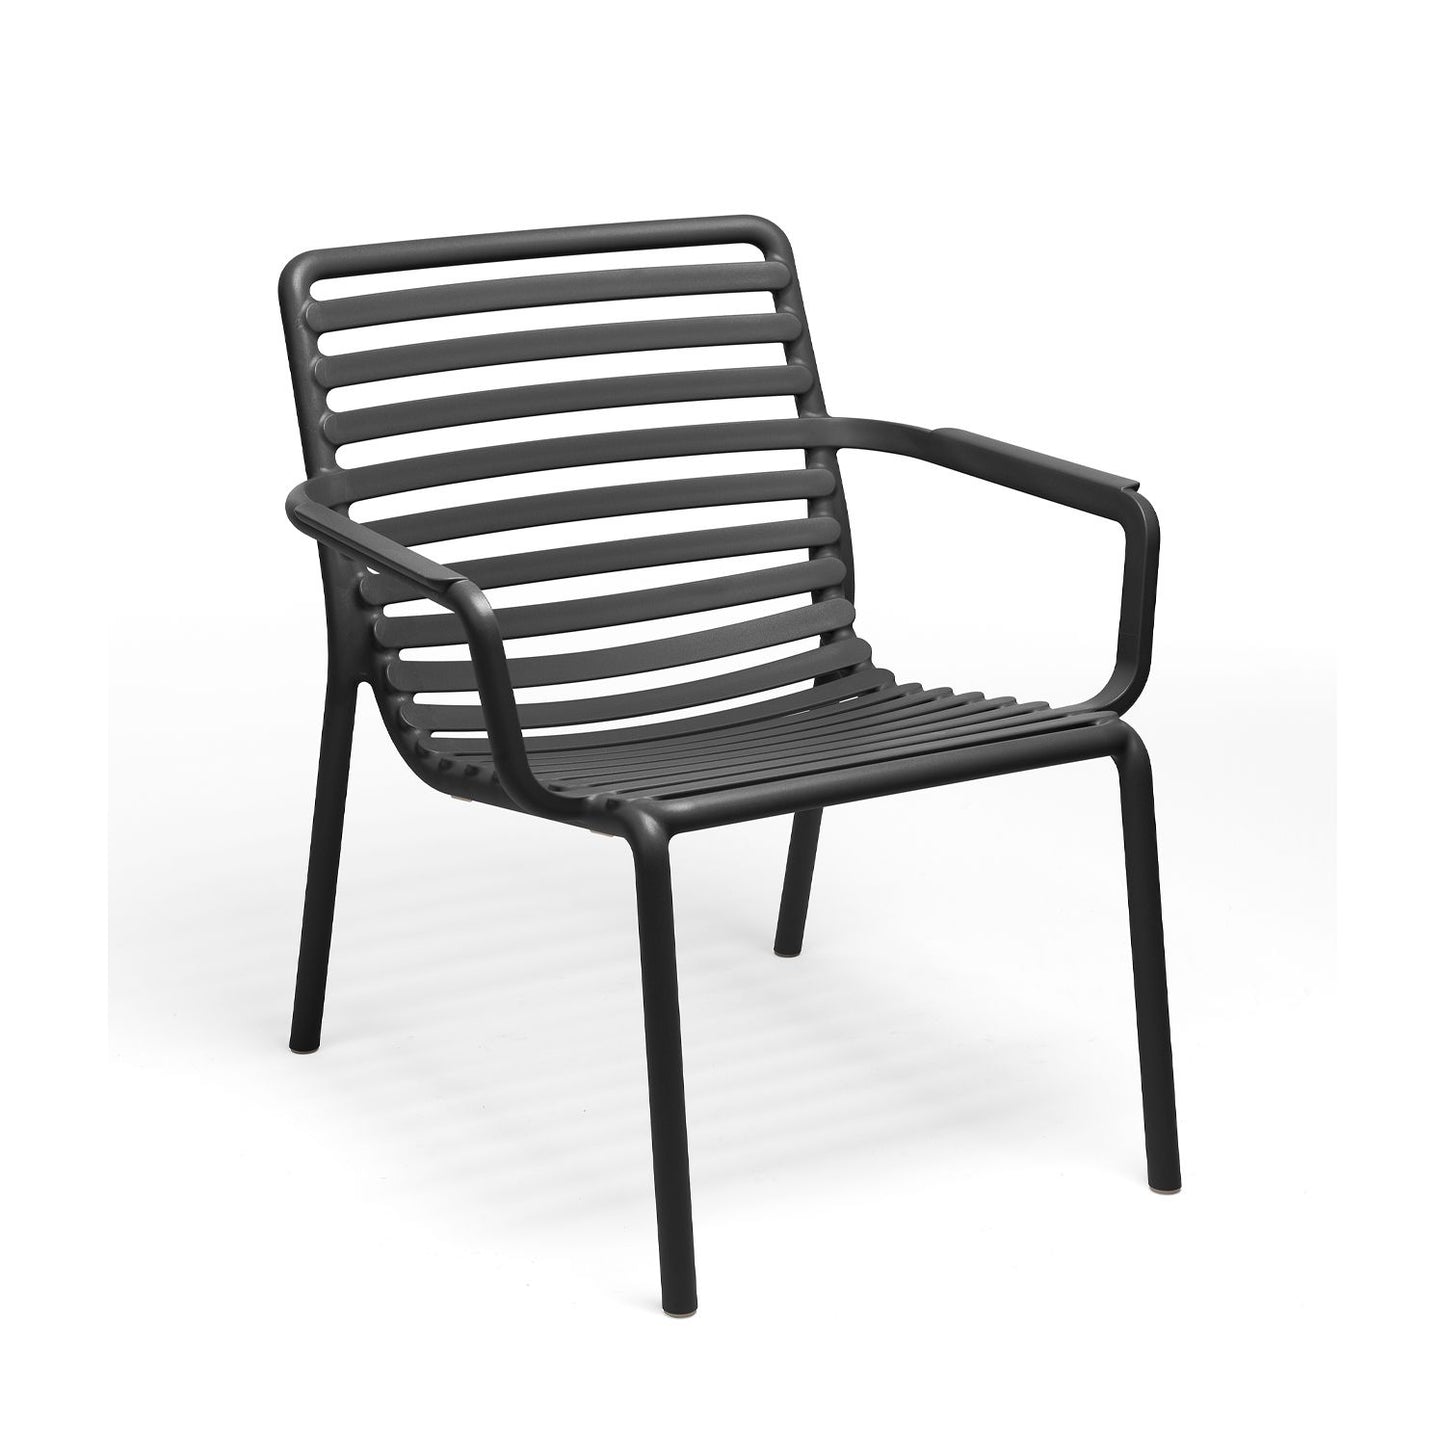 Doga Relax Garden Chair By Nardi - Set Of 4 - Anthracite